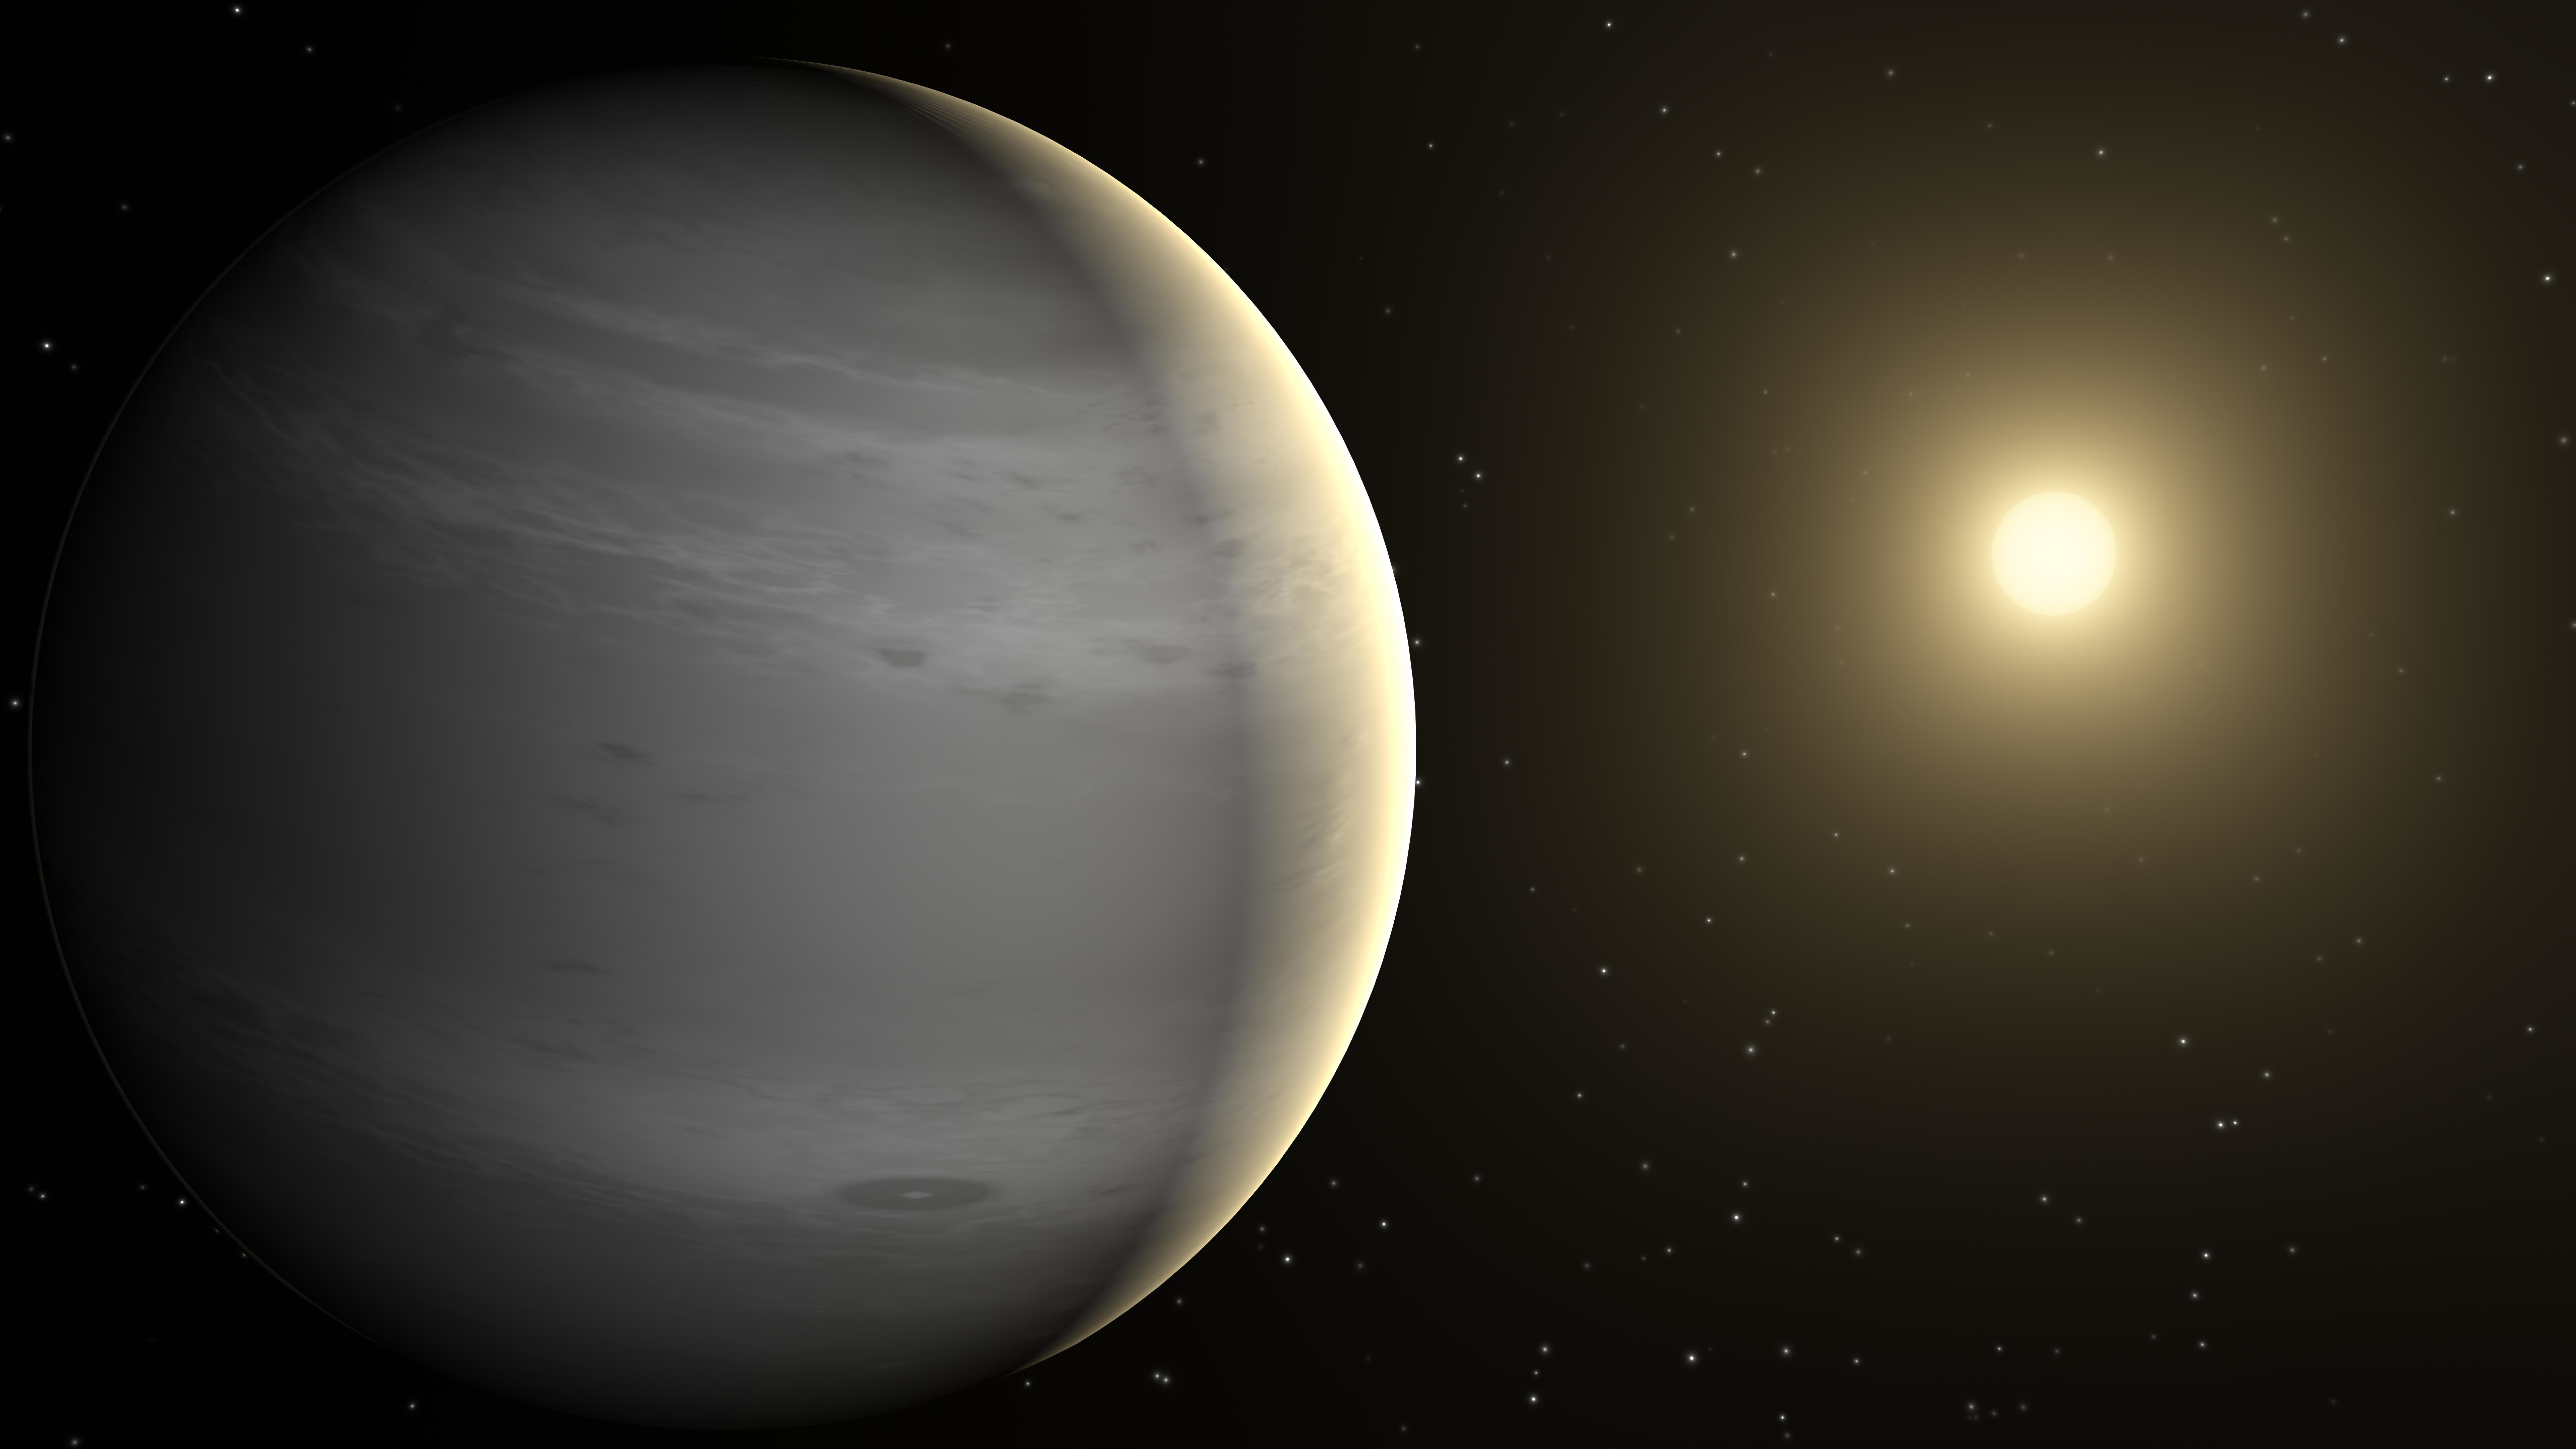 Giant exoplanet has astronomers puzzled | Max-Planck-Gesellschaft